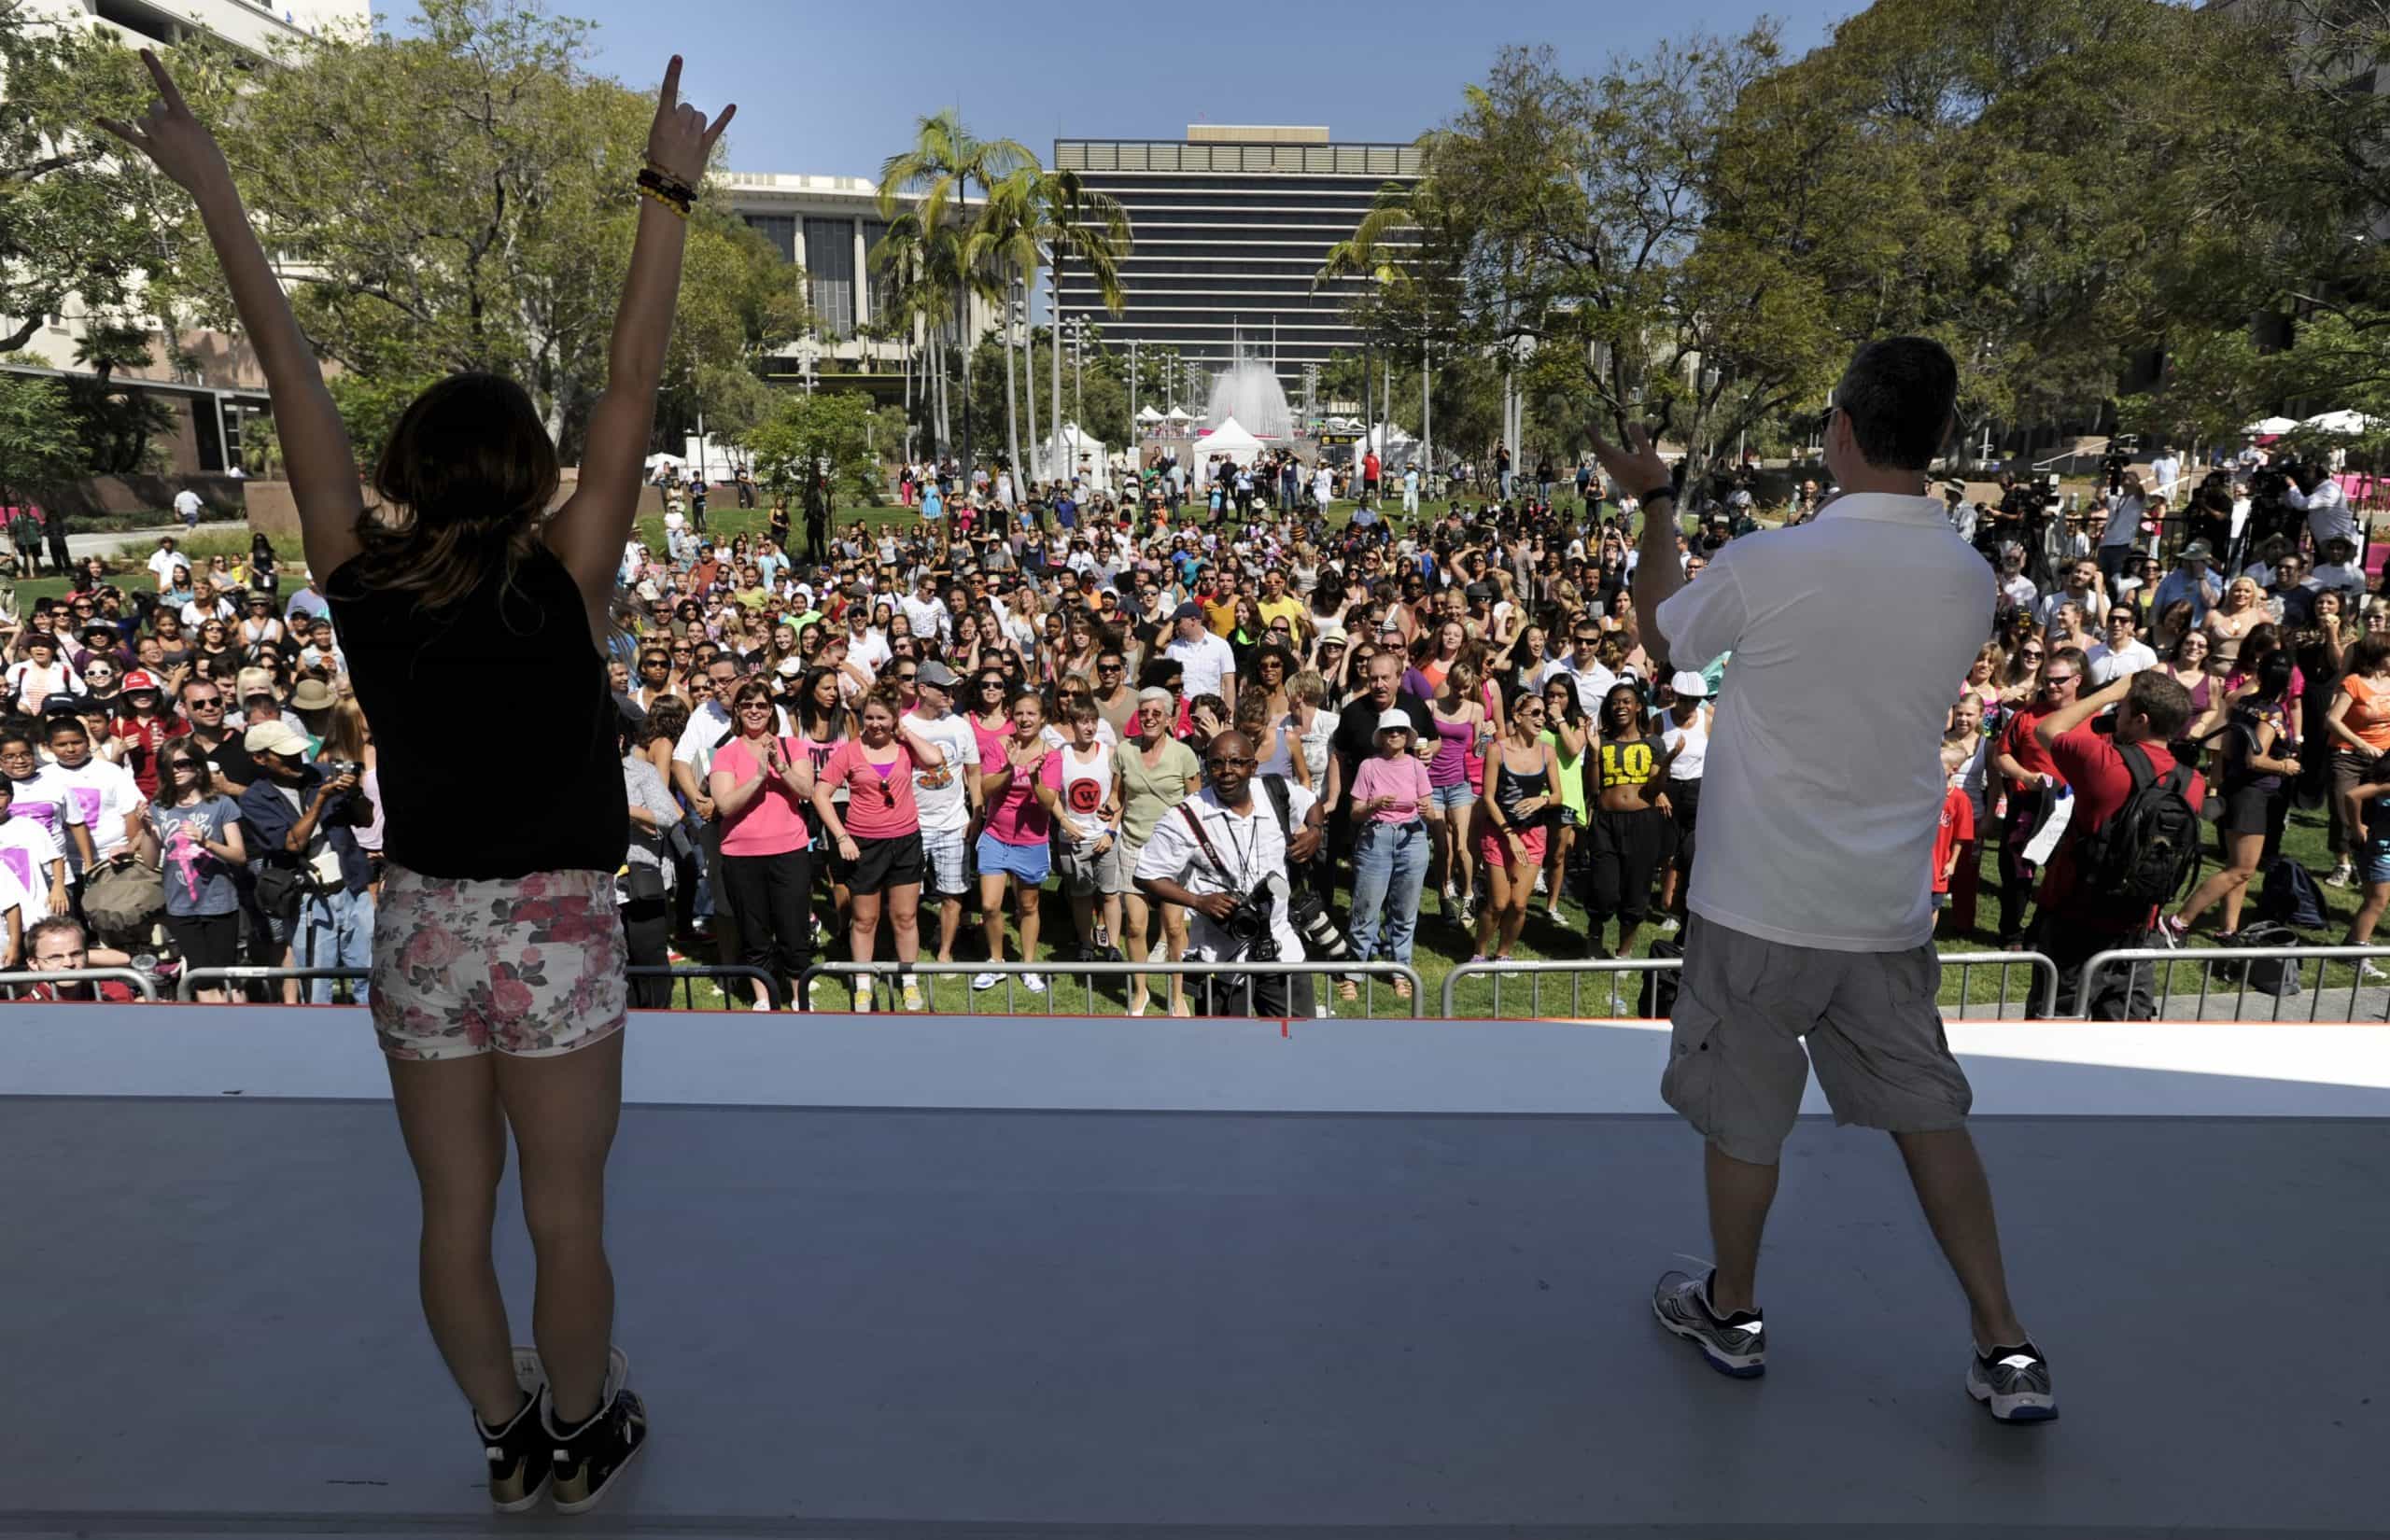 Image of two people standing in front of a crowd